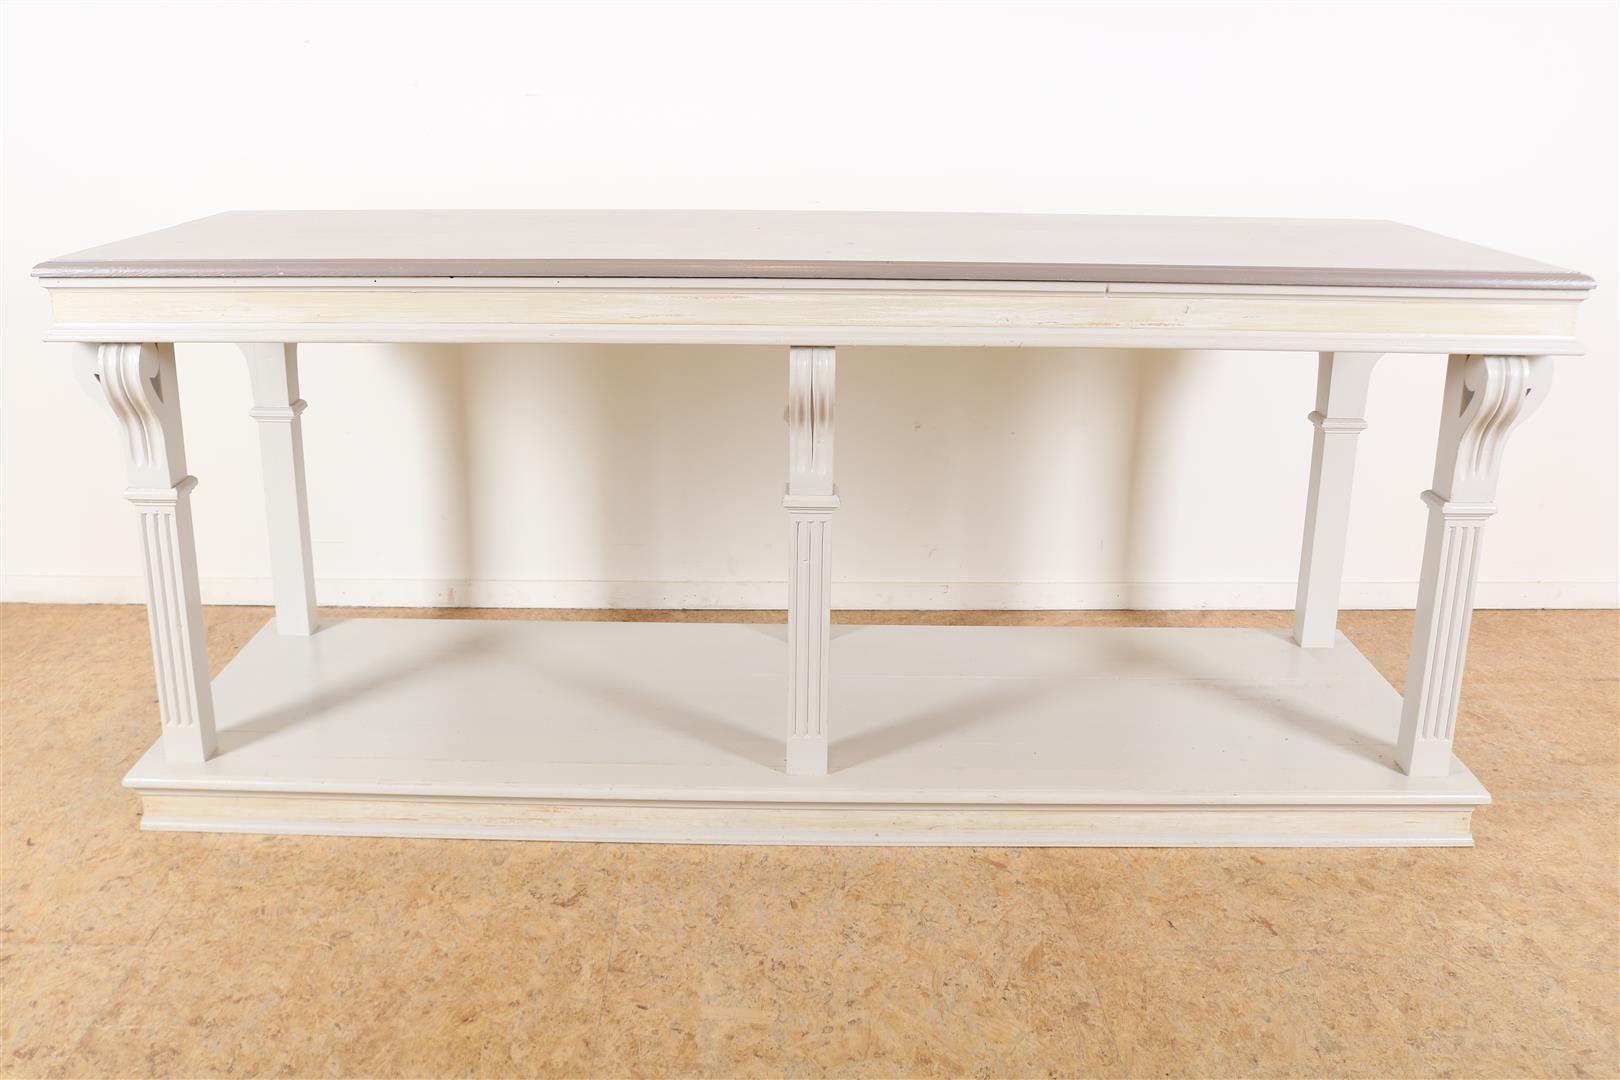 Oak white-painted side table with gray painted top on 6 block legs connected by platform, 82 x 200 x